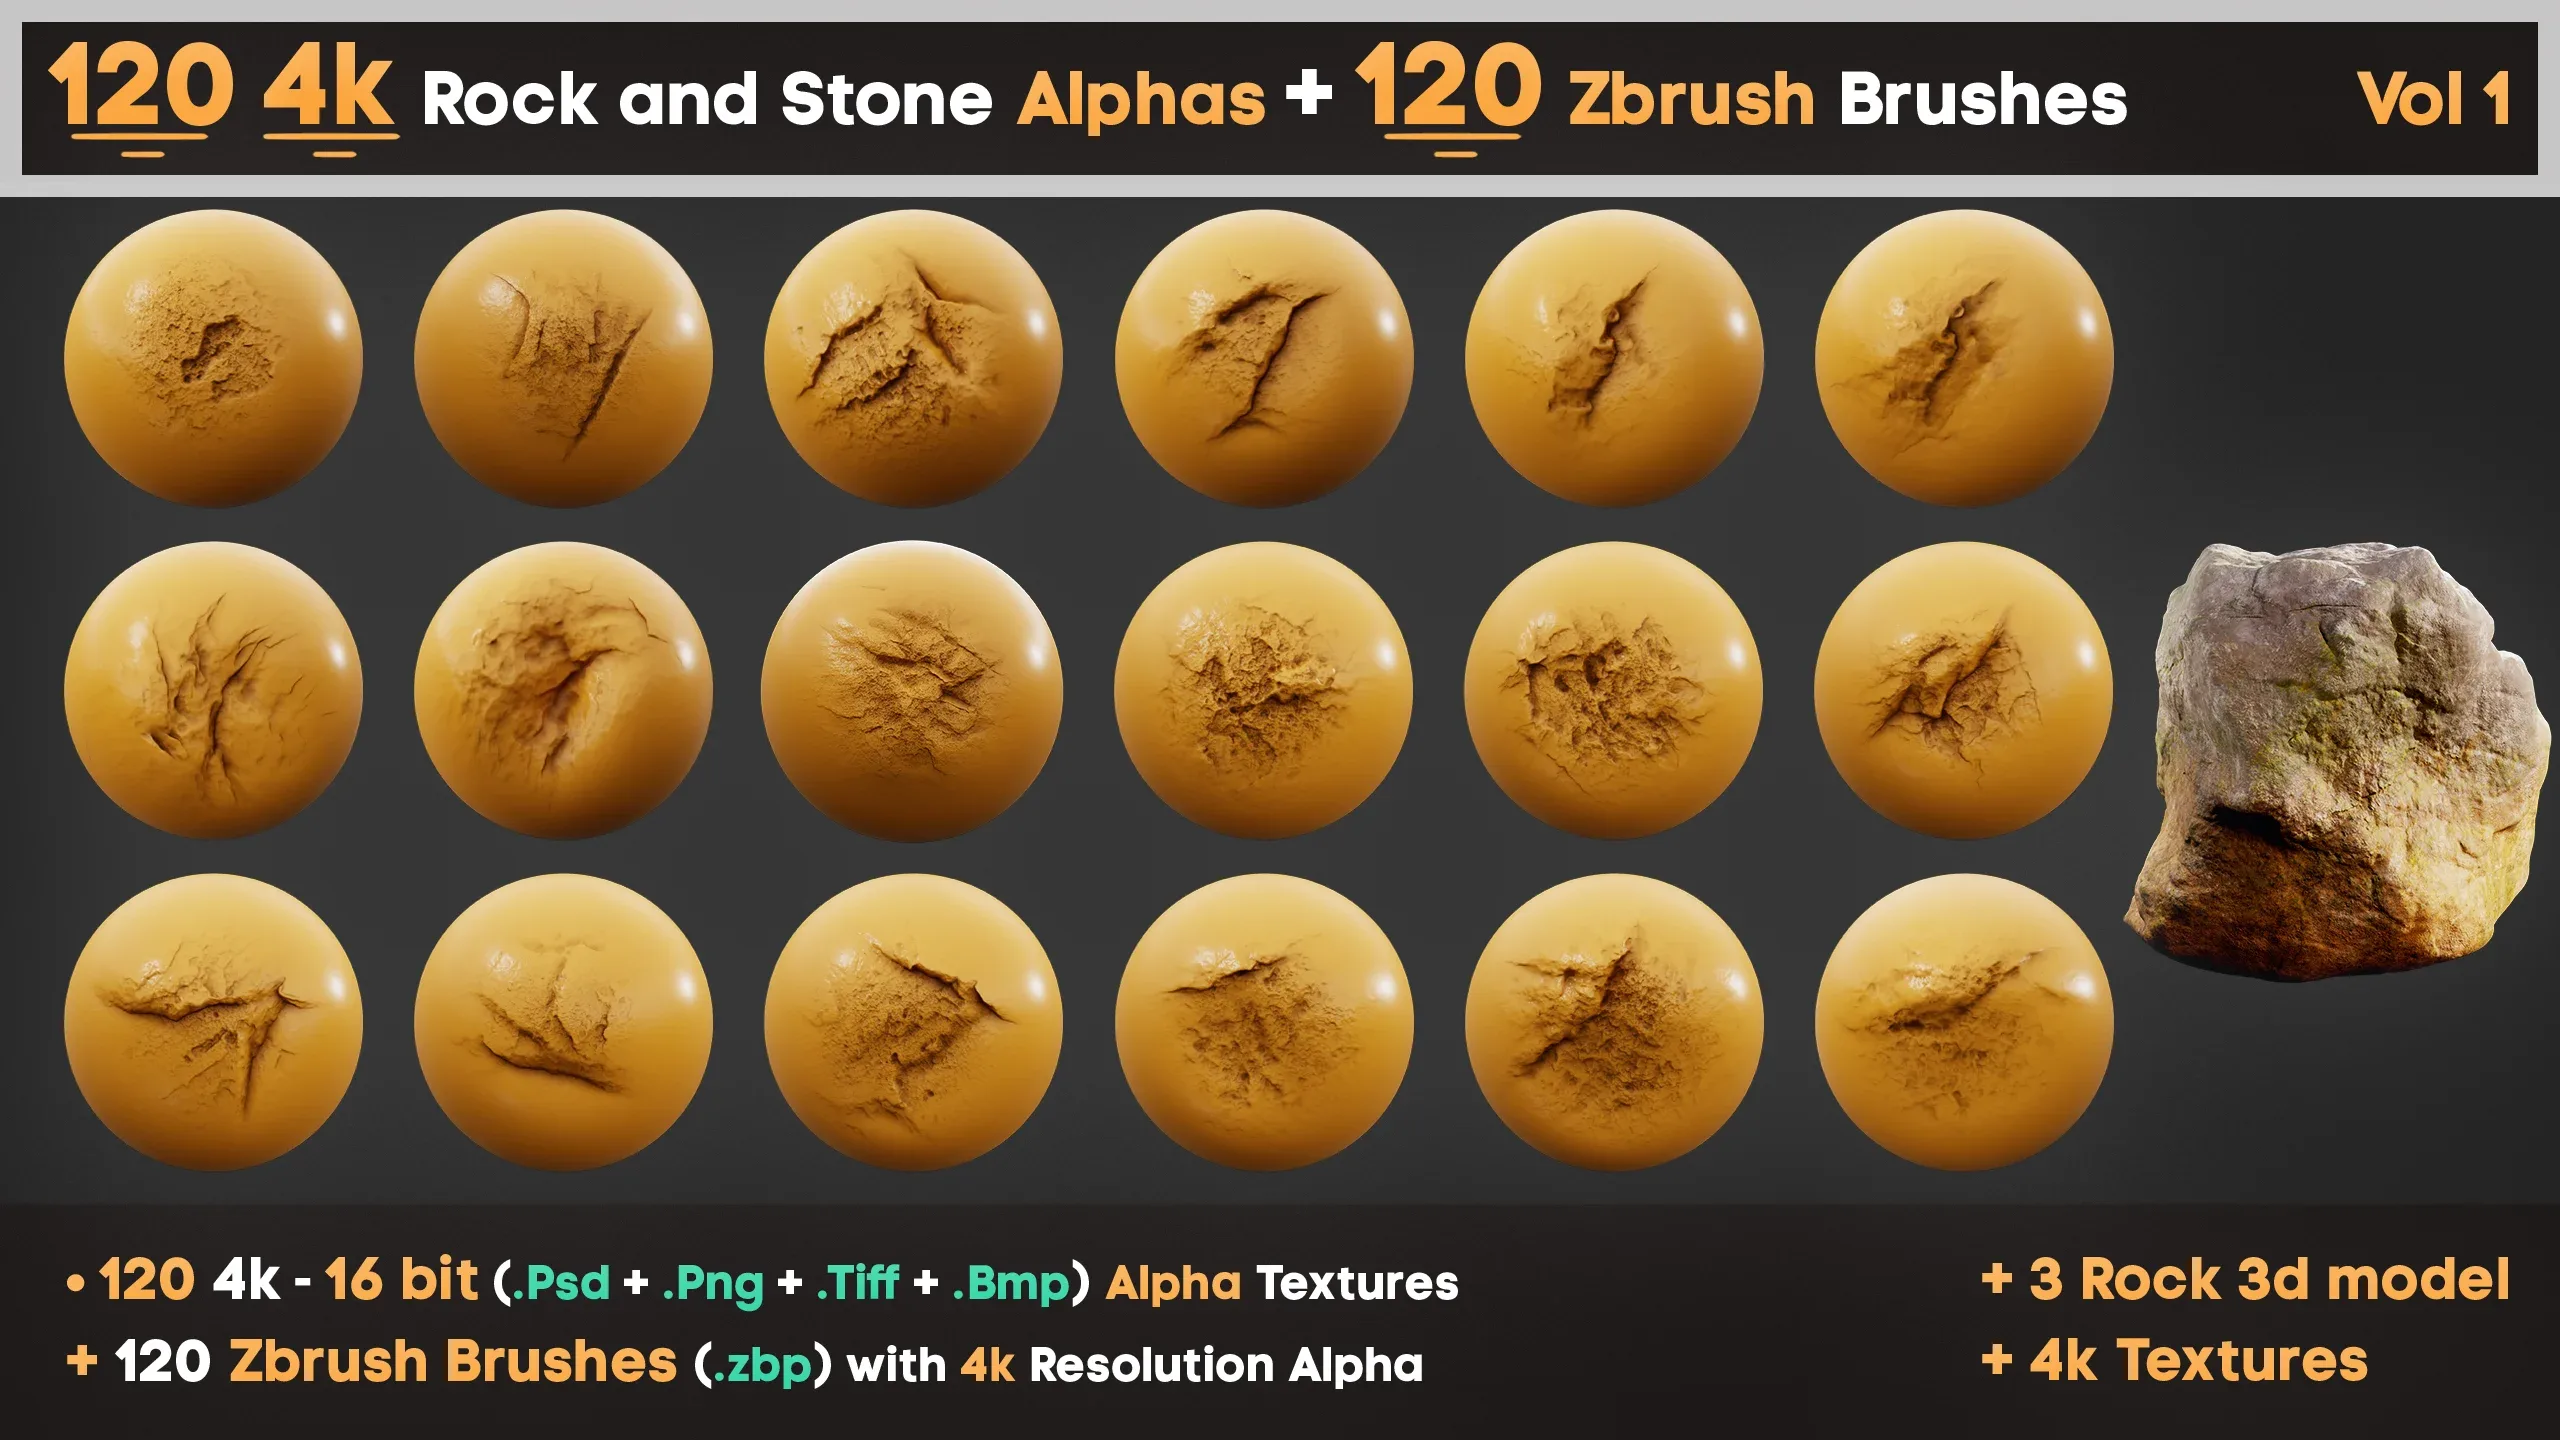 120 4K Alpha Rock and Stone Textures + 120 Zbrush Brushes vol 1 for Professional Sculpting 3D Art and Game Development